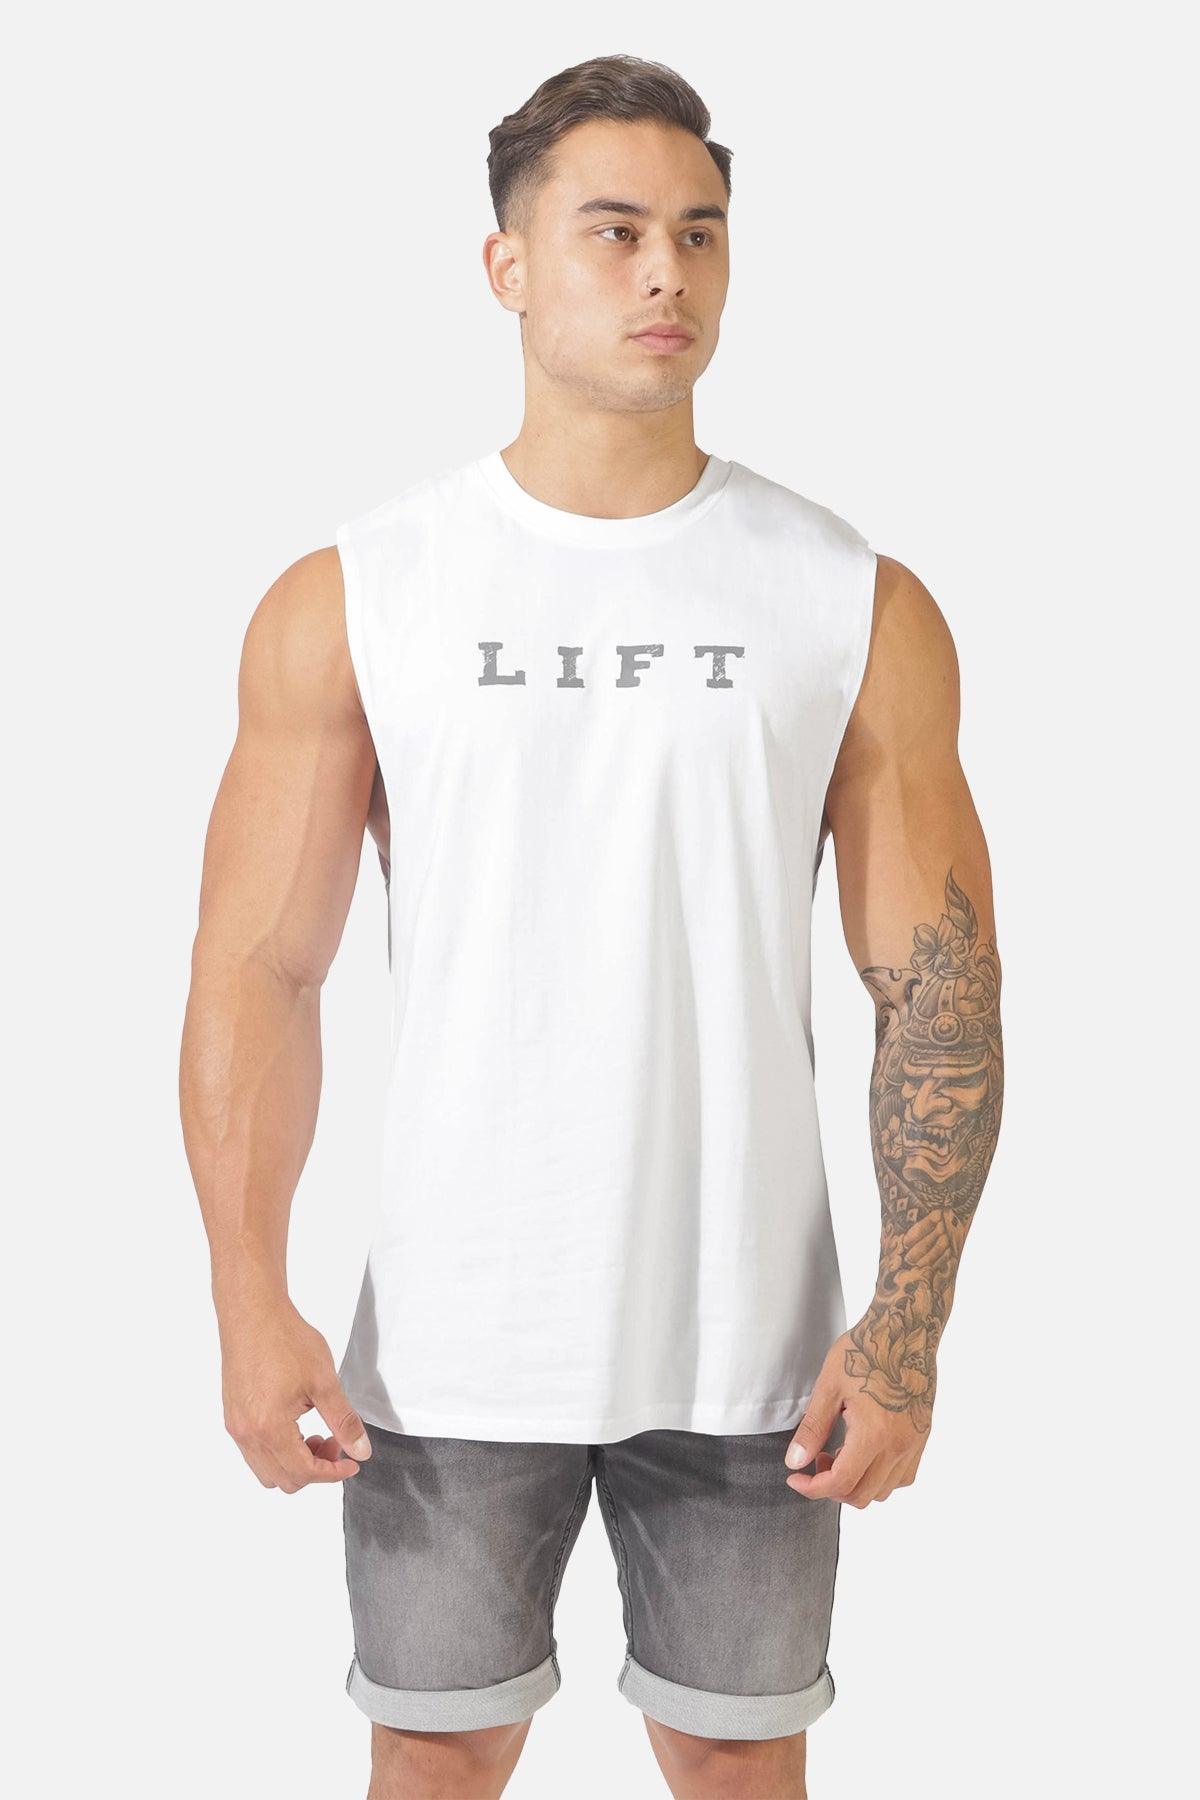 Workout Muscle Tee - Lift - Jed North